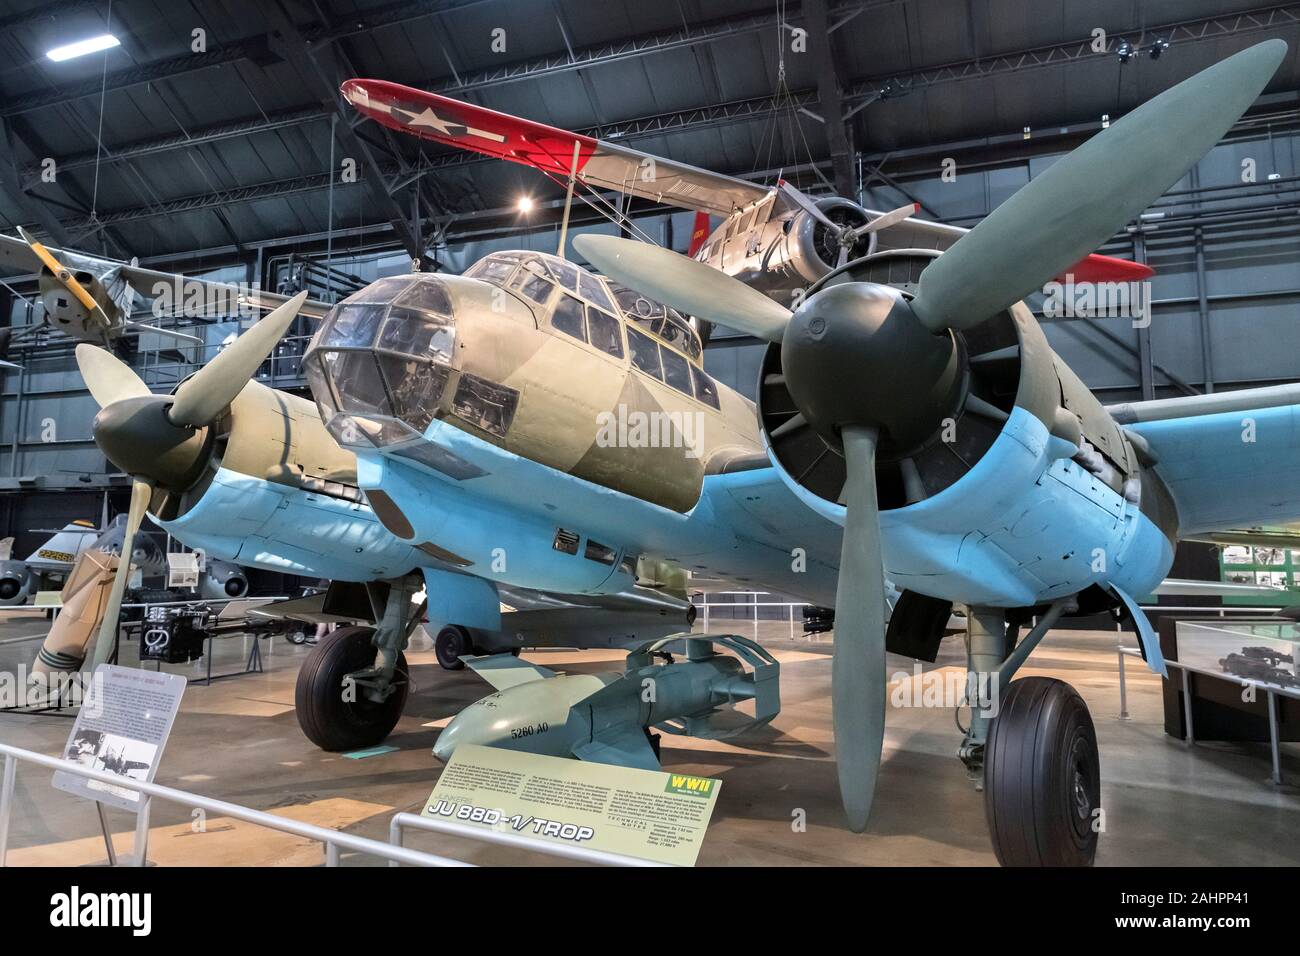 German Junkers Ju 88D WWII aircraft, National Museum of the United States Air Force (formerly the United States Air Force Museum), Dayton, Ohio, USA Stock Photo